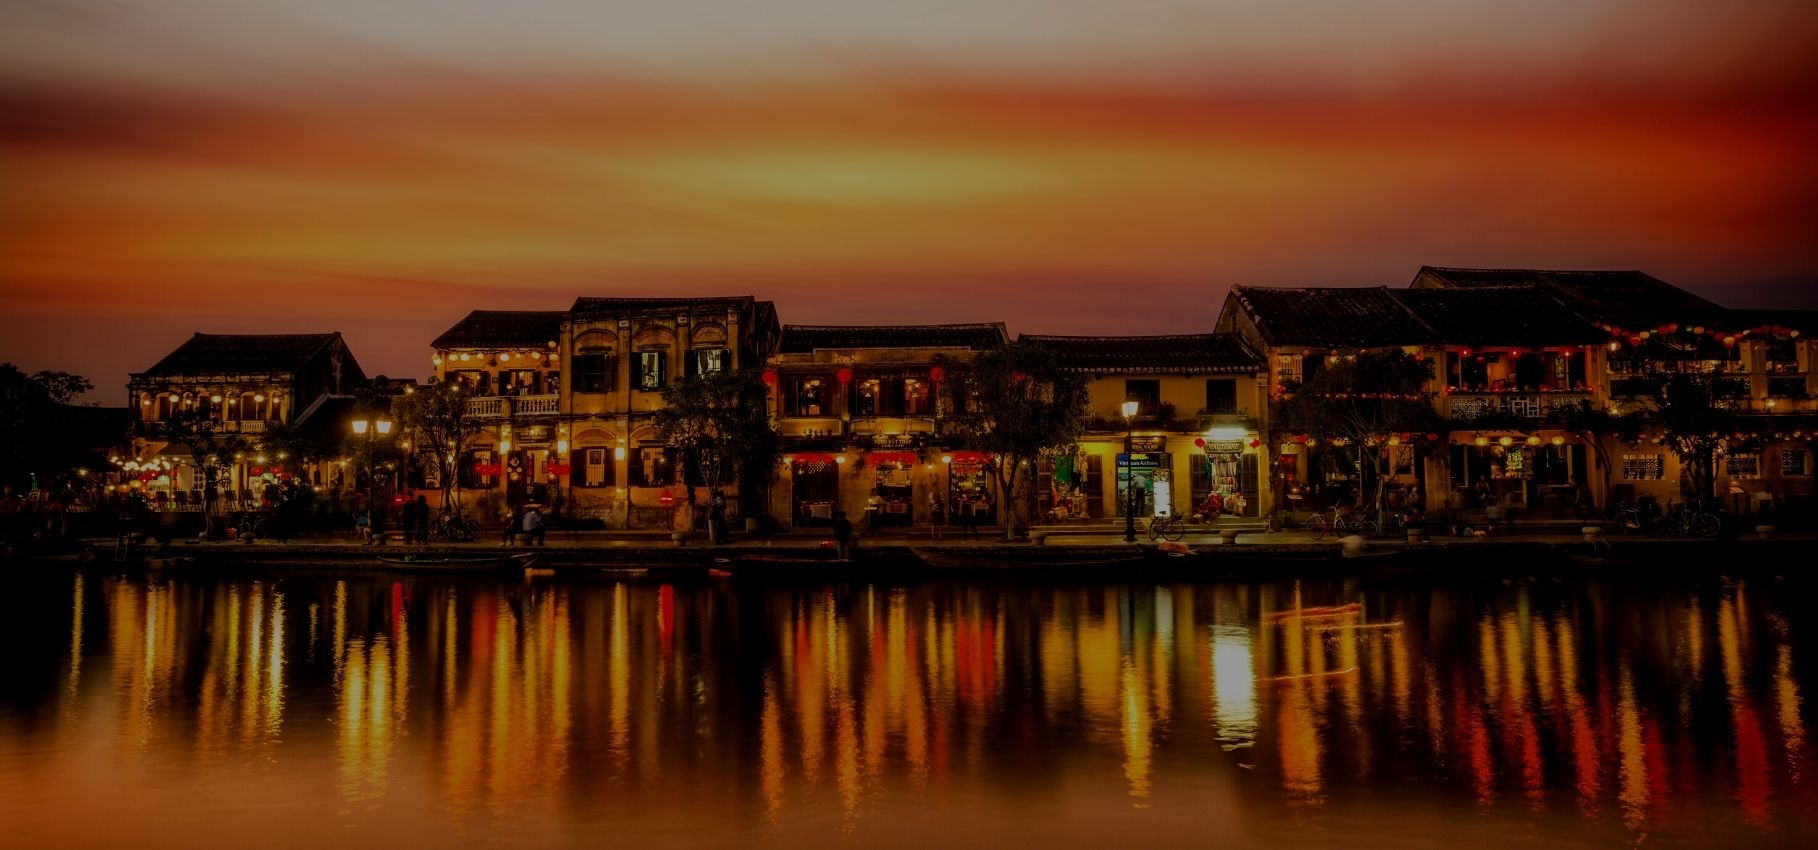 Places to Visit in Hoi An, Vietnam